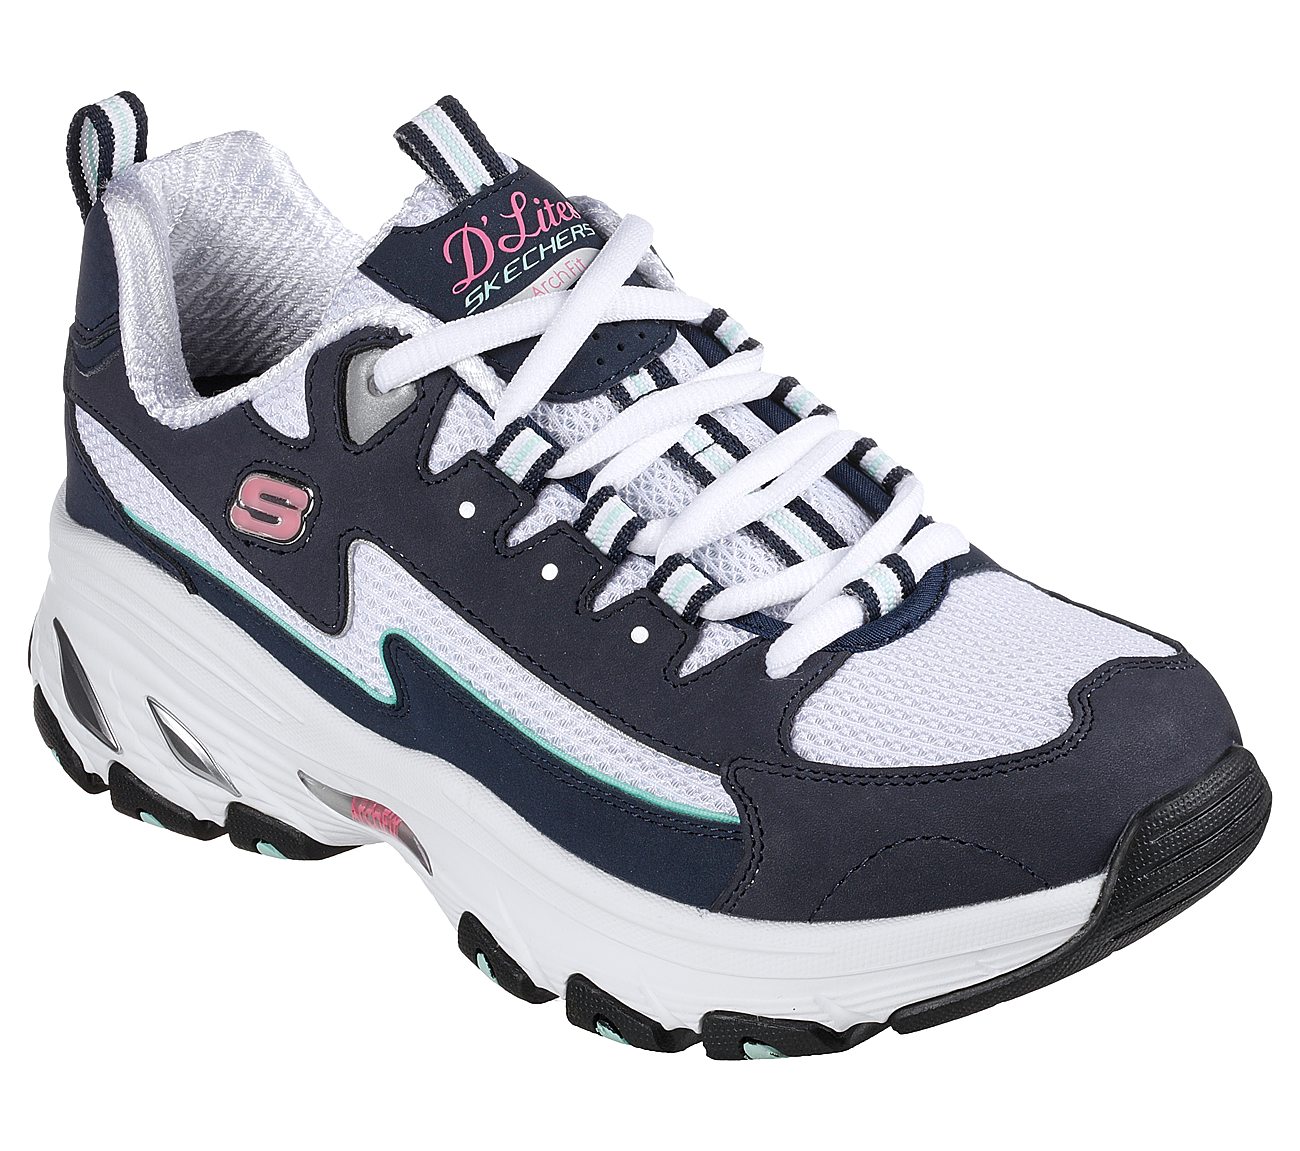 Skechers D'Lites Arch Fit - Better Me. Mujer